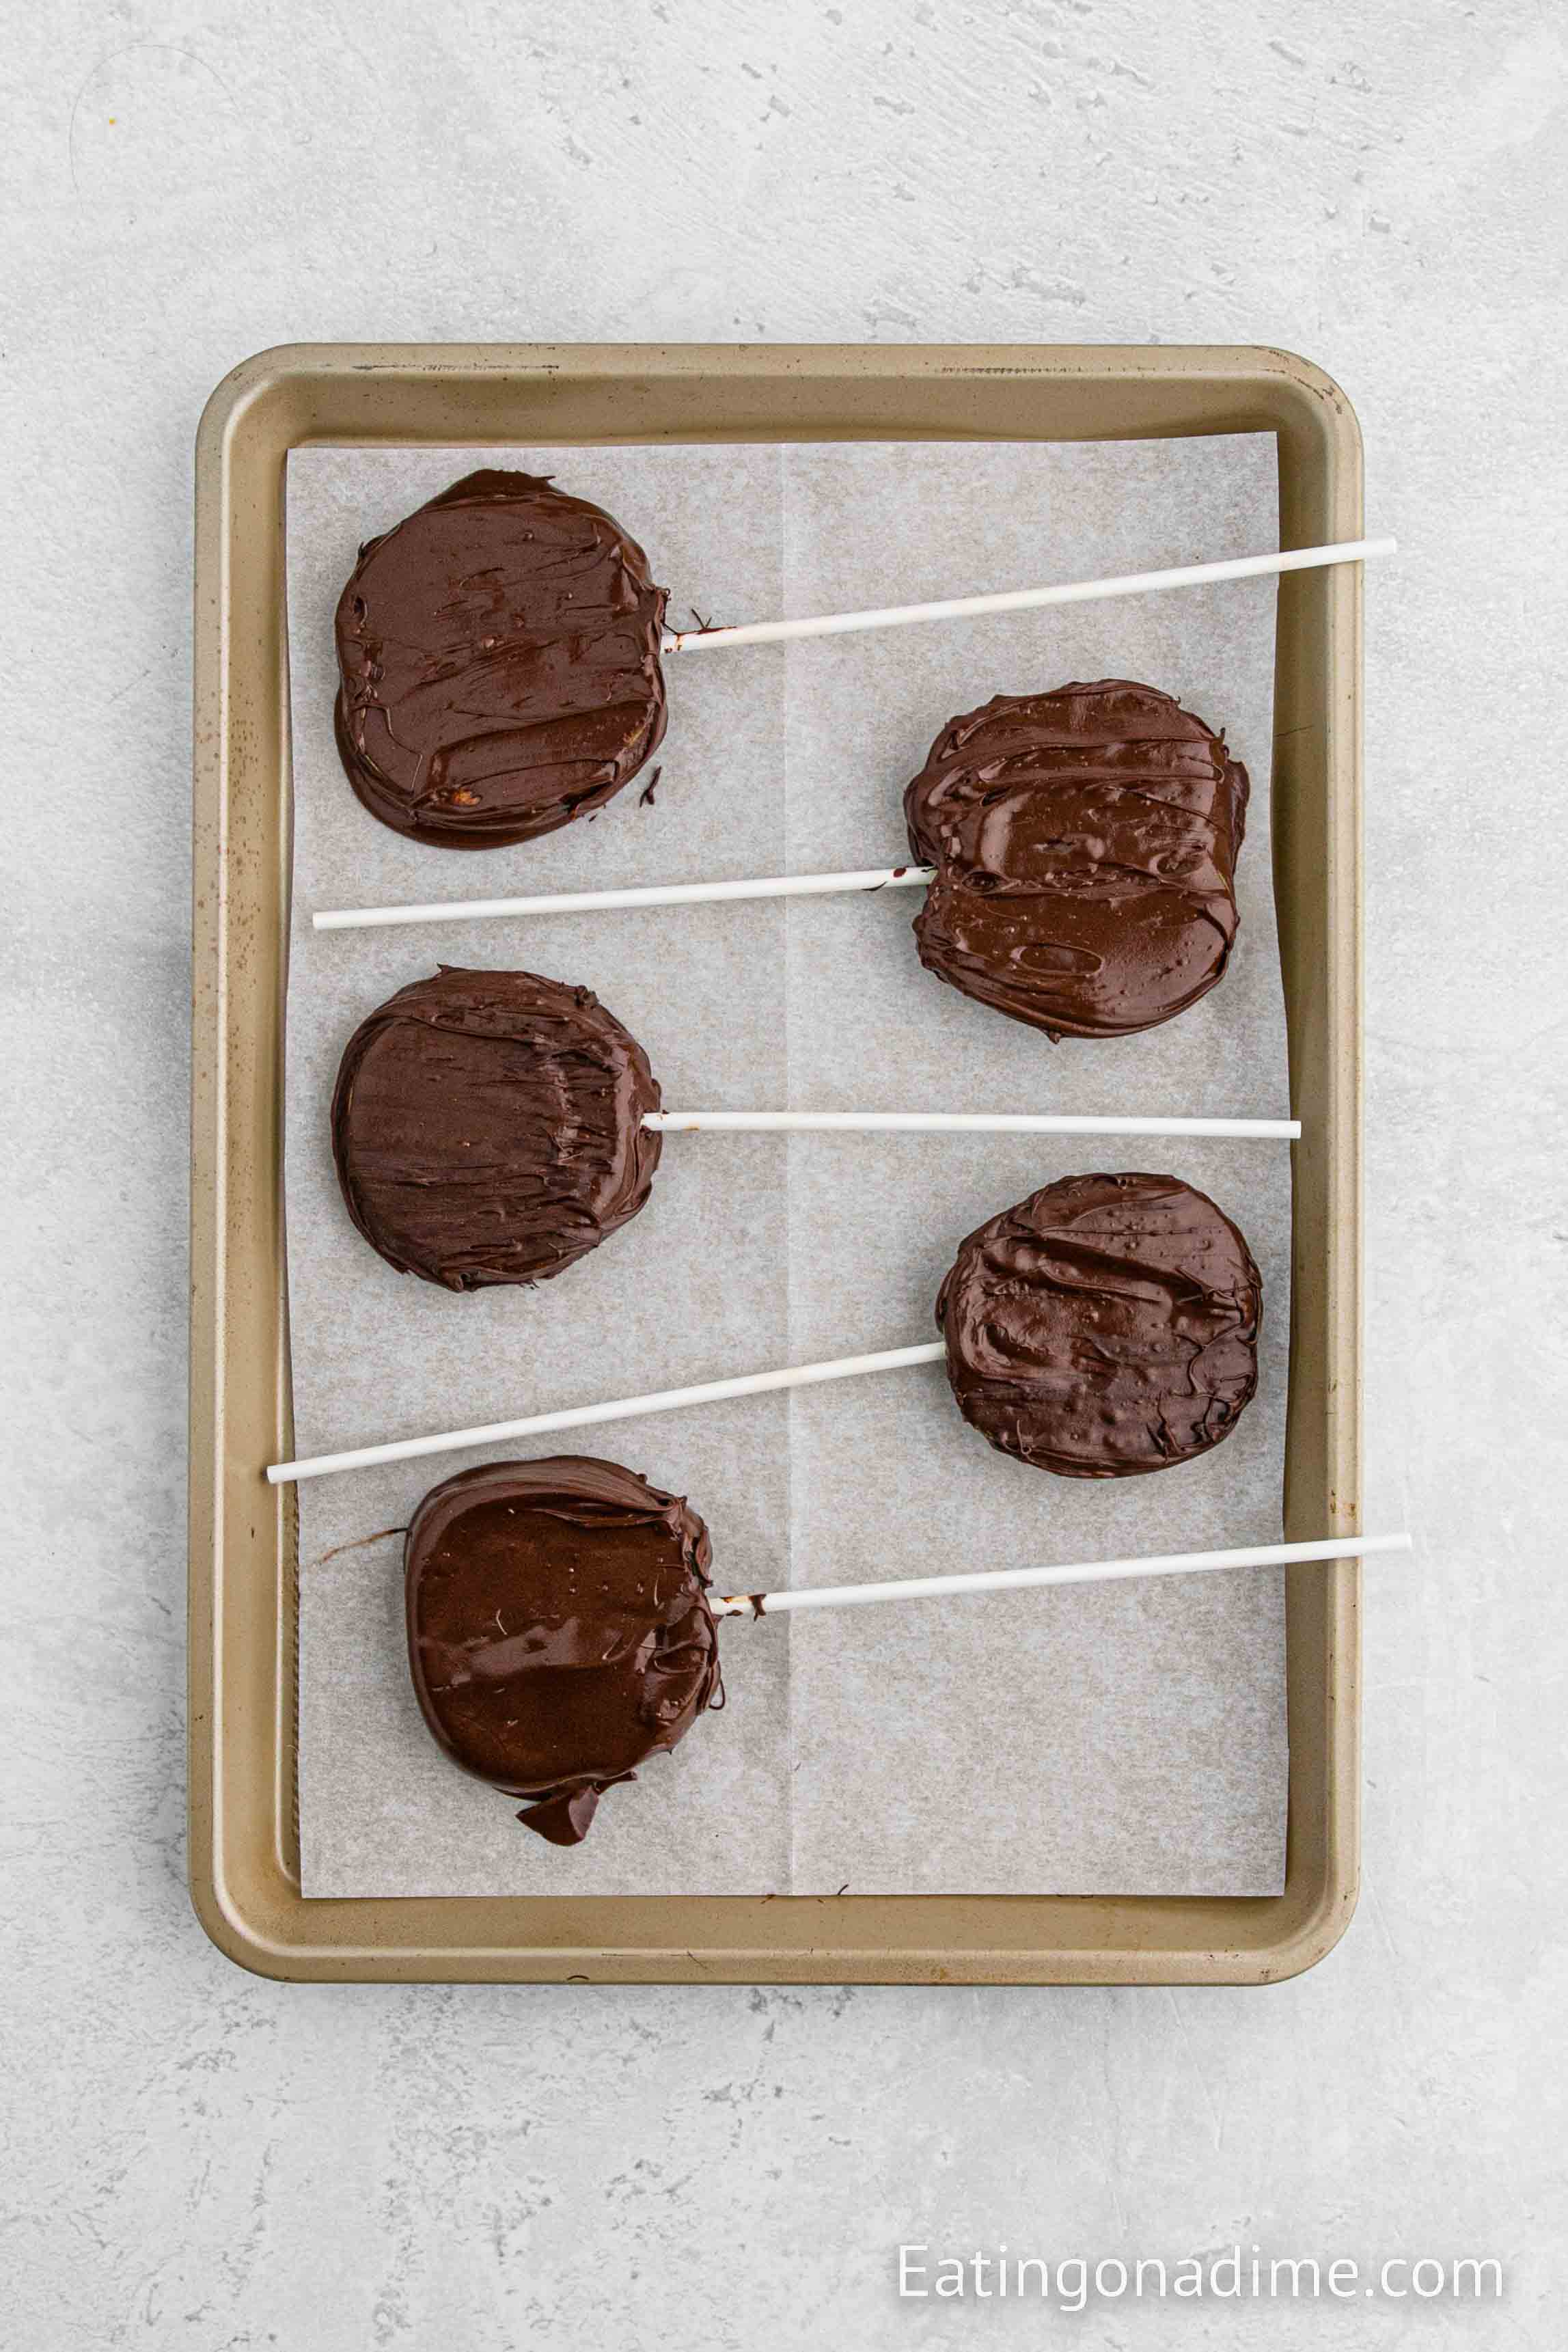 Placing chocolate dipping apple slicing on a baking sheet